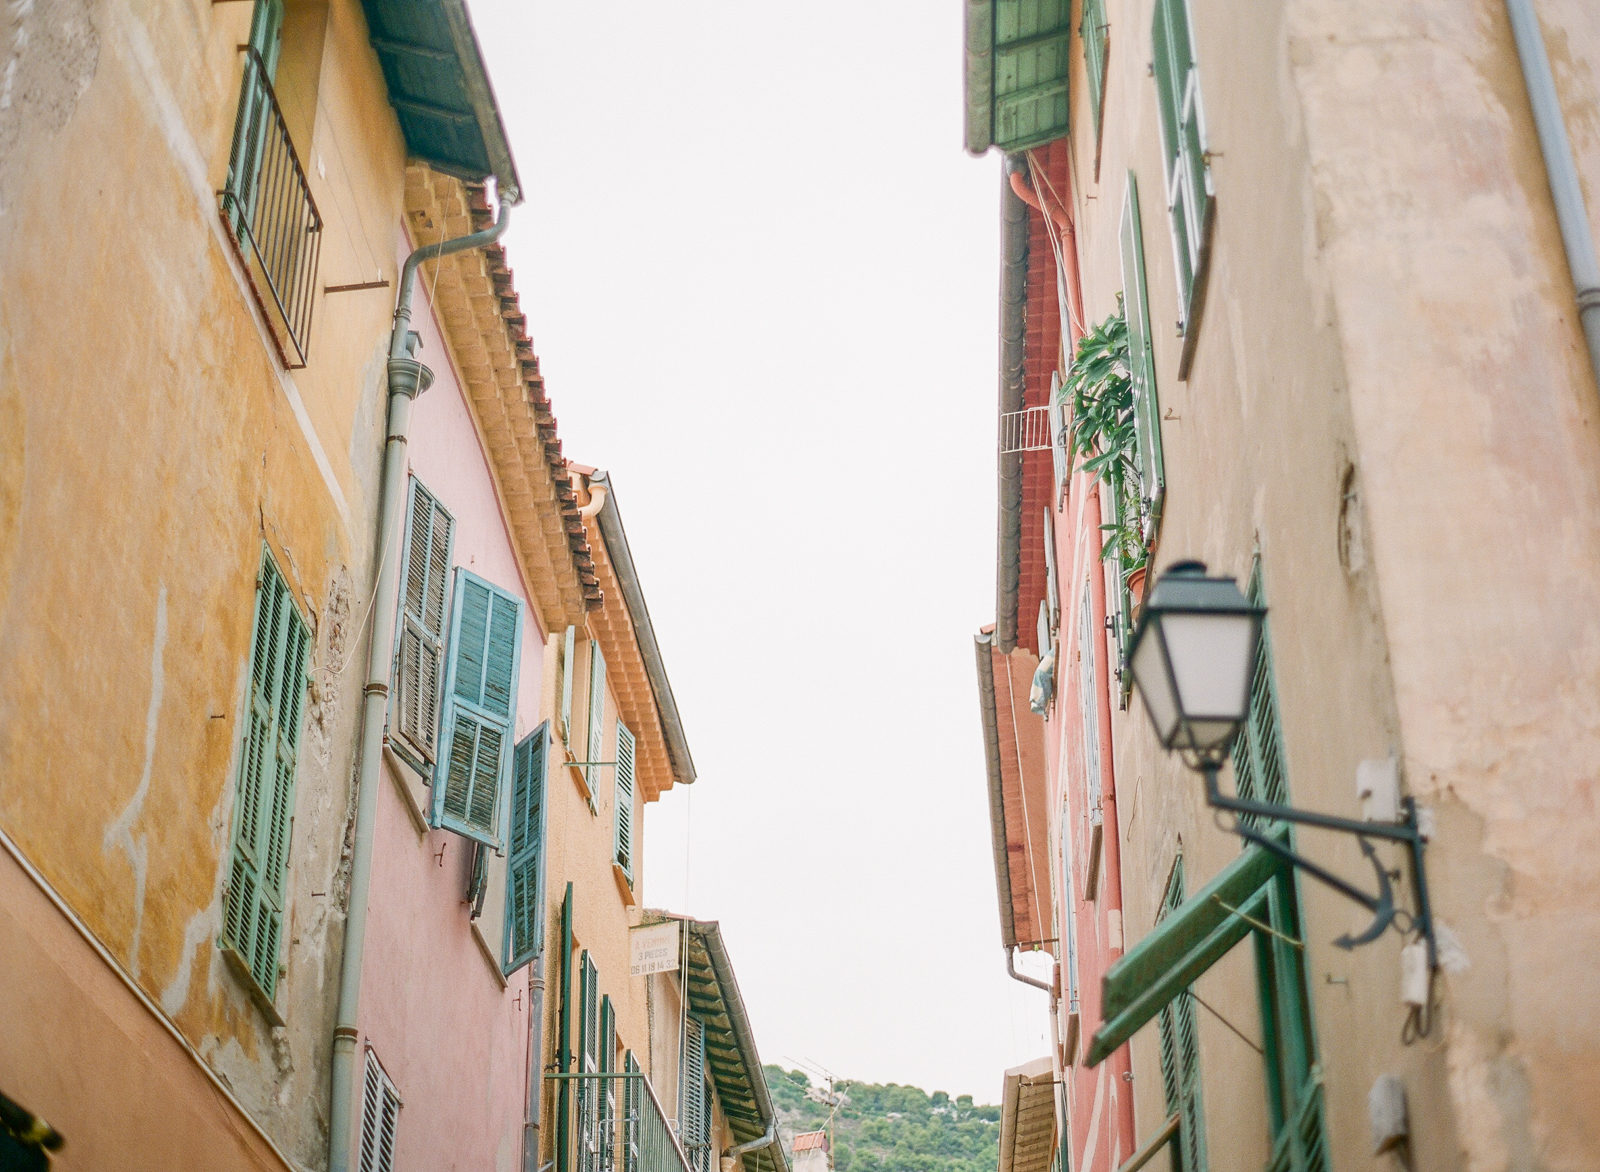 French Riviera Wedding Photographer | Cote d'Azur Travel Guide | Destination Wedding Photographer | Fine Art Film Photographer | Molly Carr Photography | Villefranche-sur-Mer Travel Guide